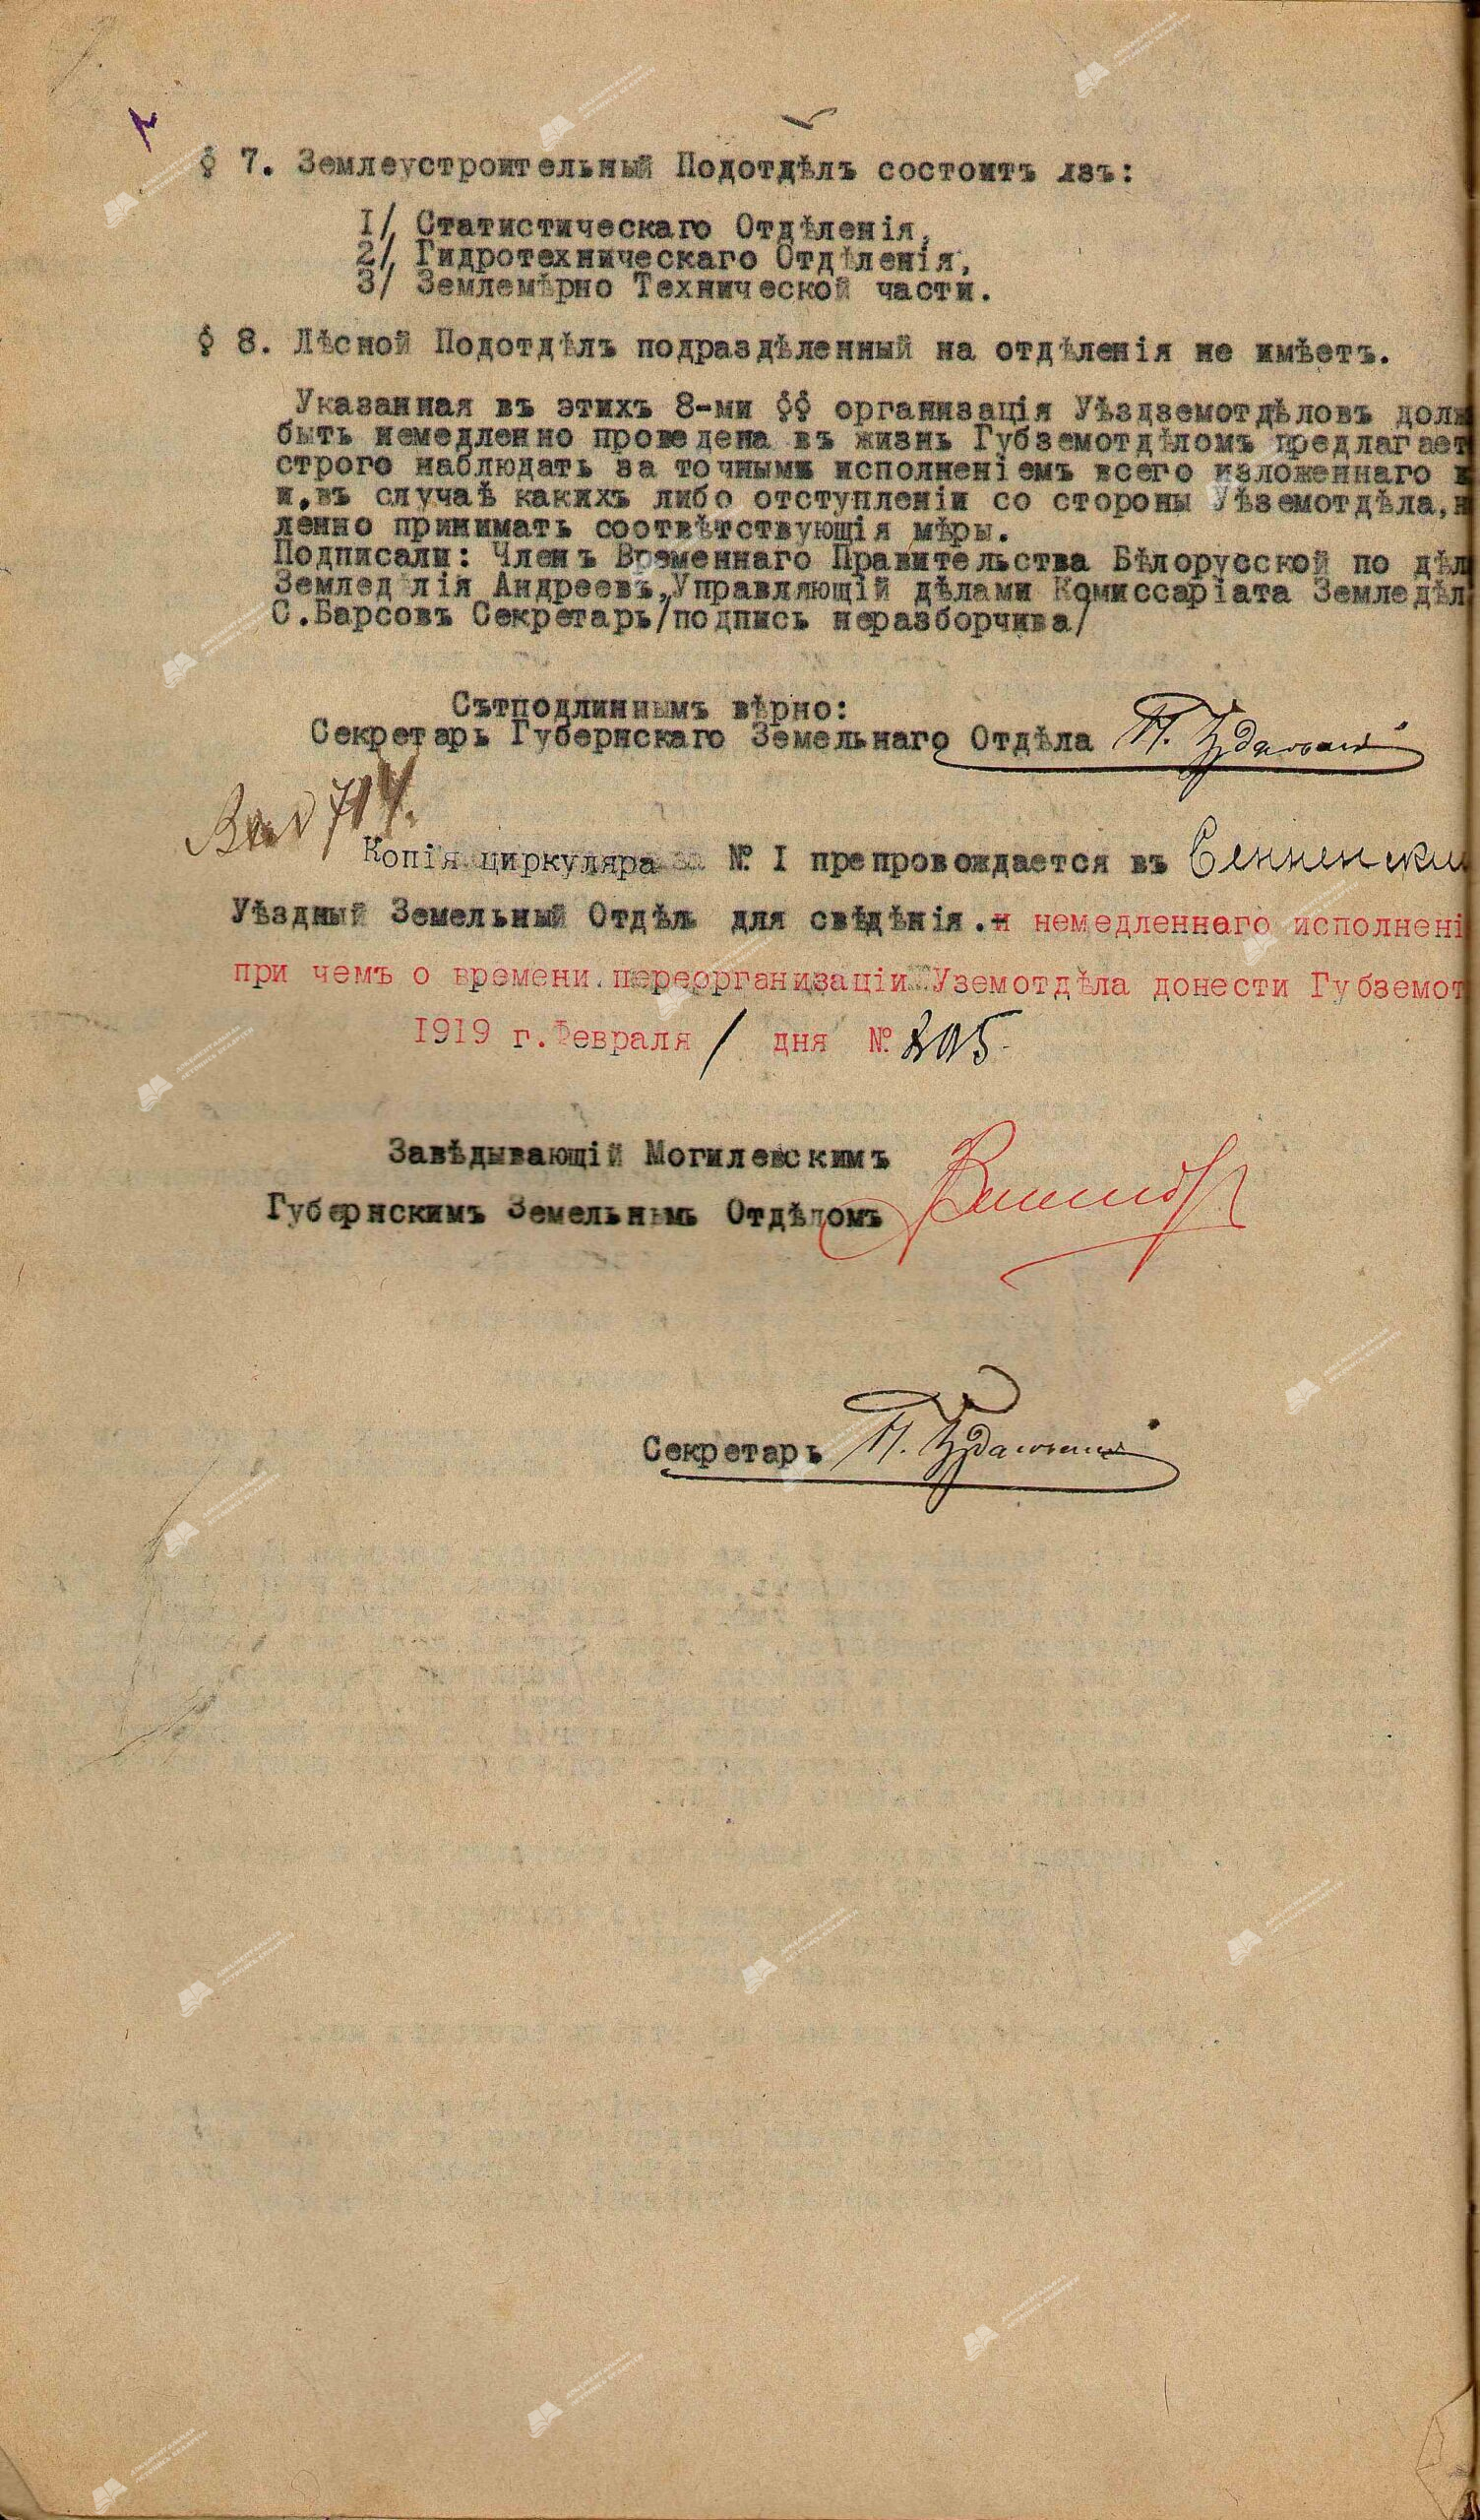 Circular No. 1 of the Commissariat of Agriculture of the Provisional Workers' and Peasants' Government of Belarus «On the organization of county land departments on the territory of the Belarusian Soviet Socialist Republic and the scheme of the county land department»-стр. 1